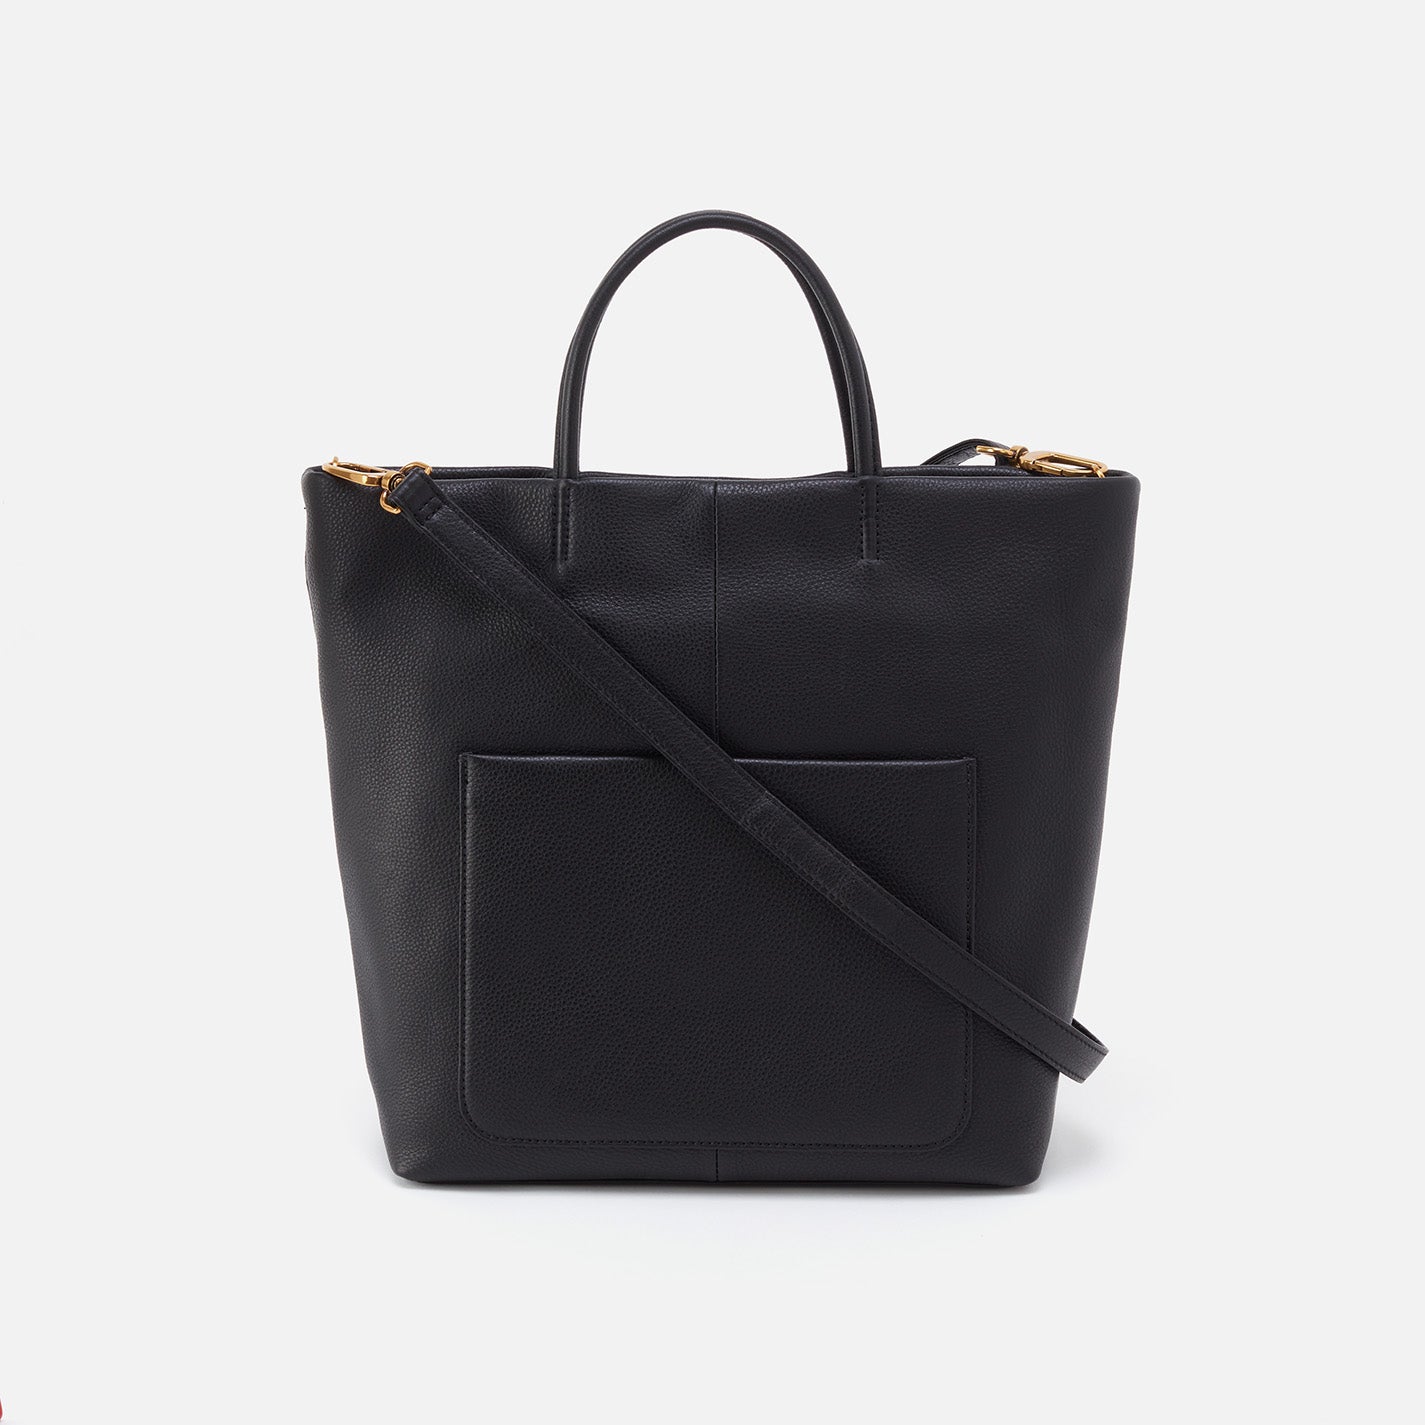 black tote bag with handles and strap.